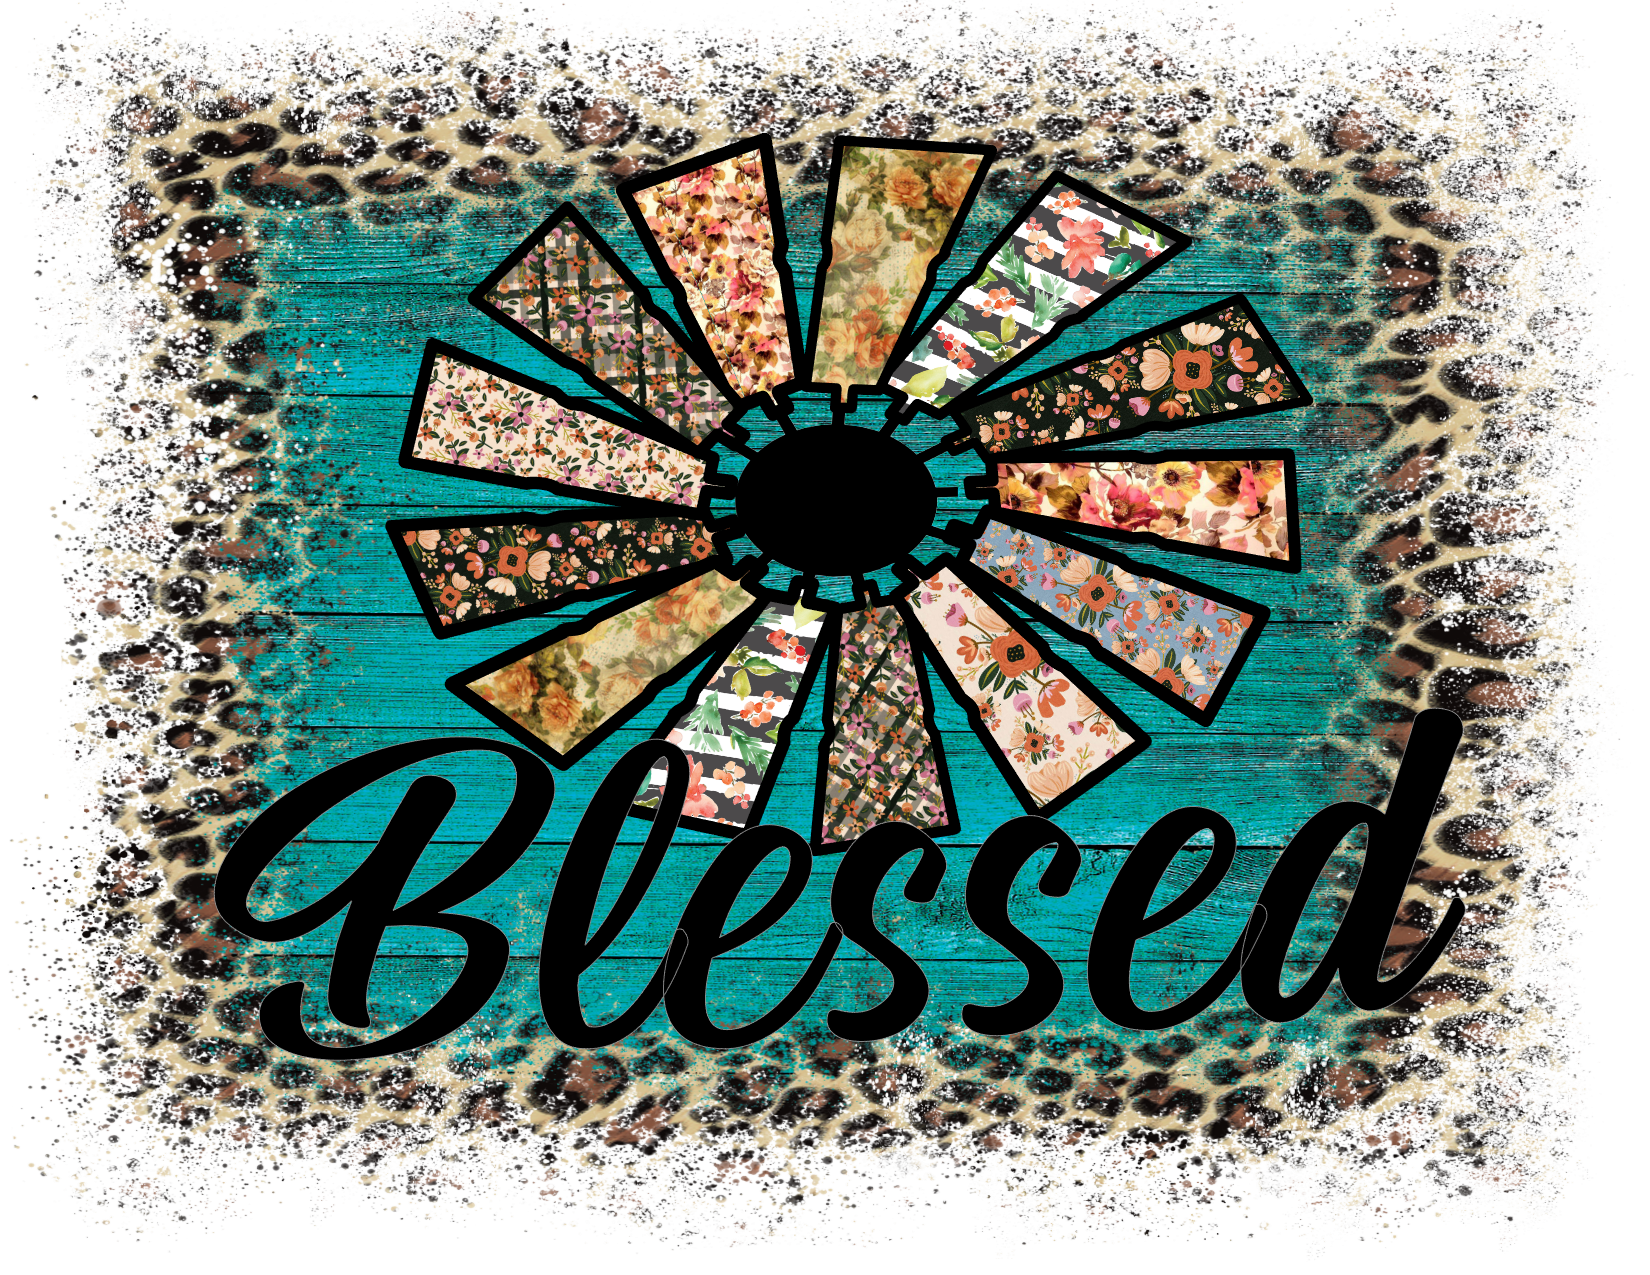 #19 Blessed (turquoise)